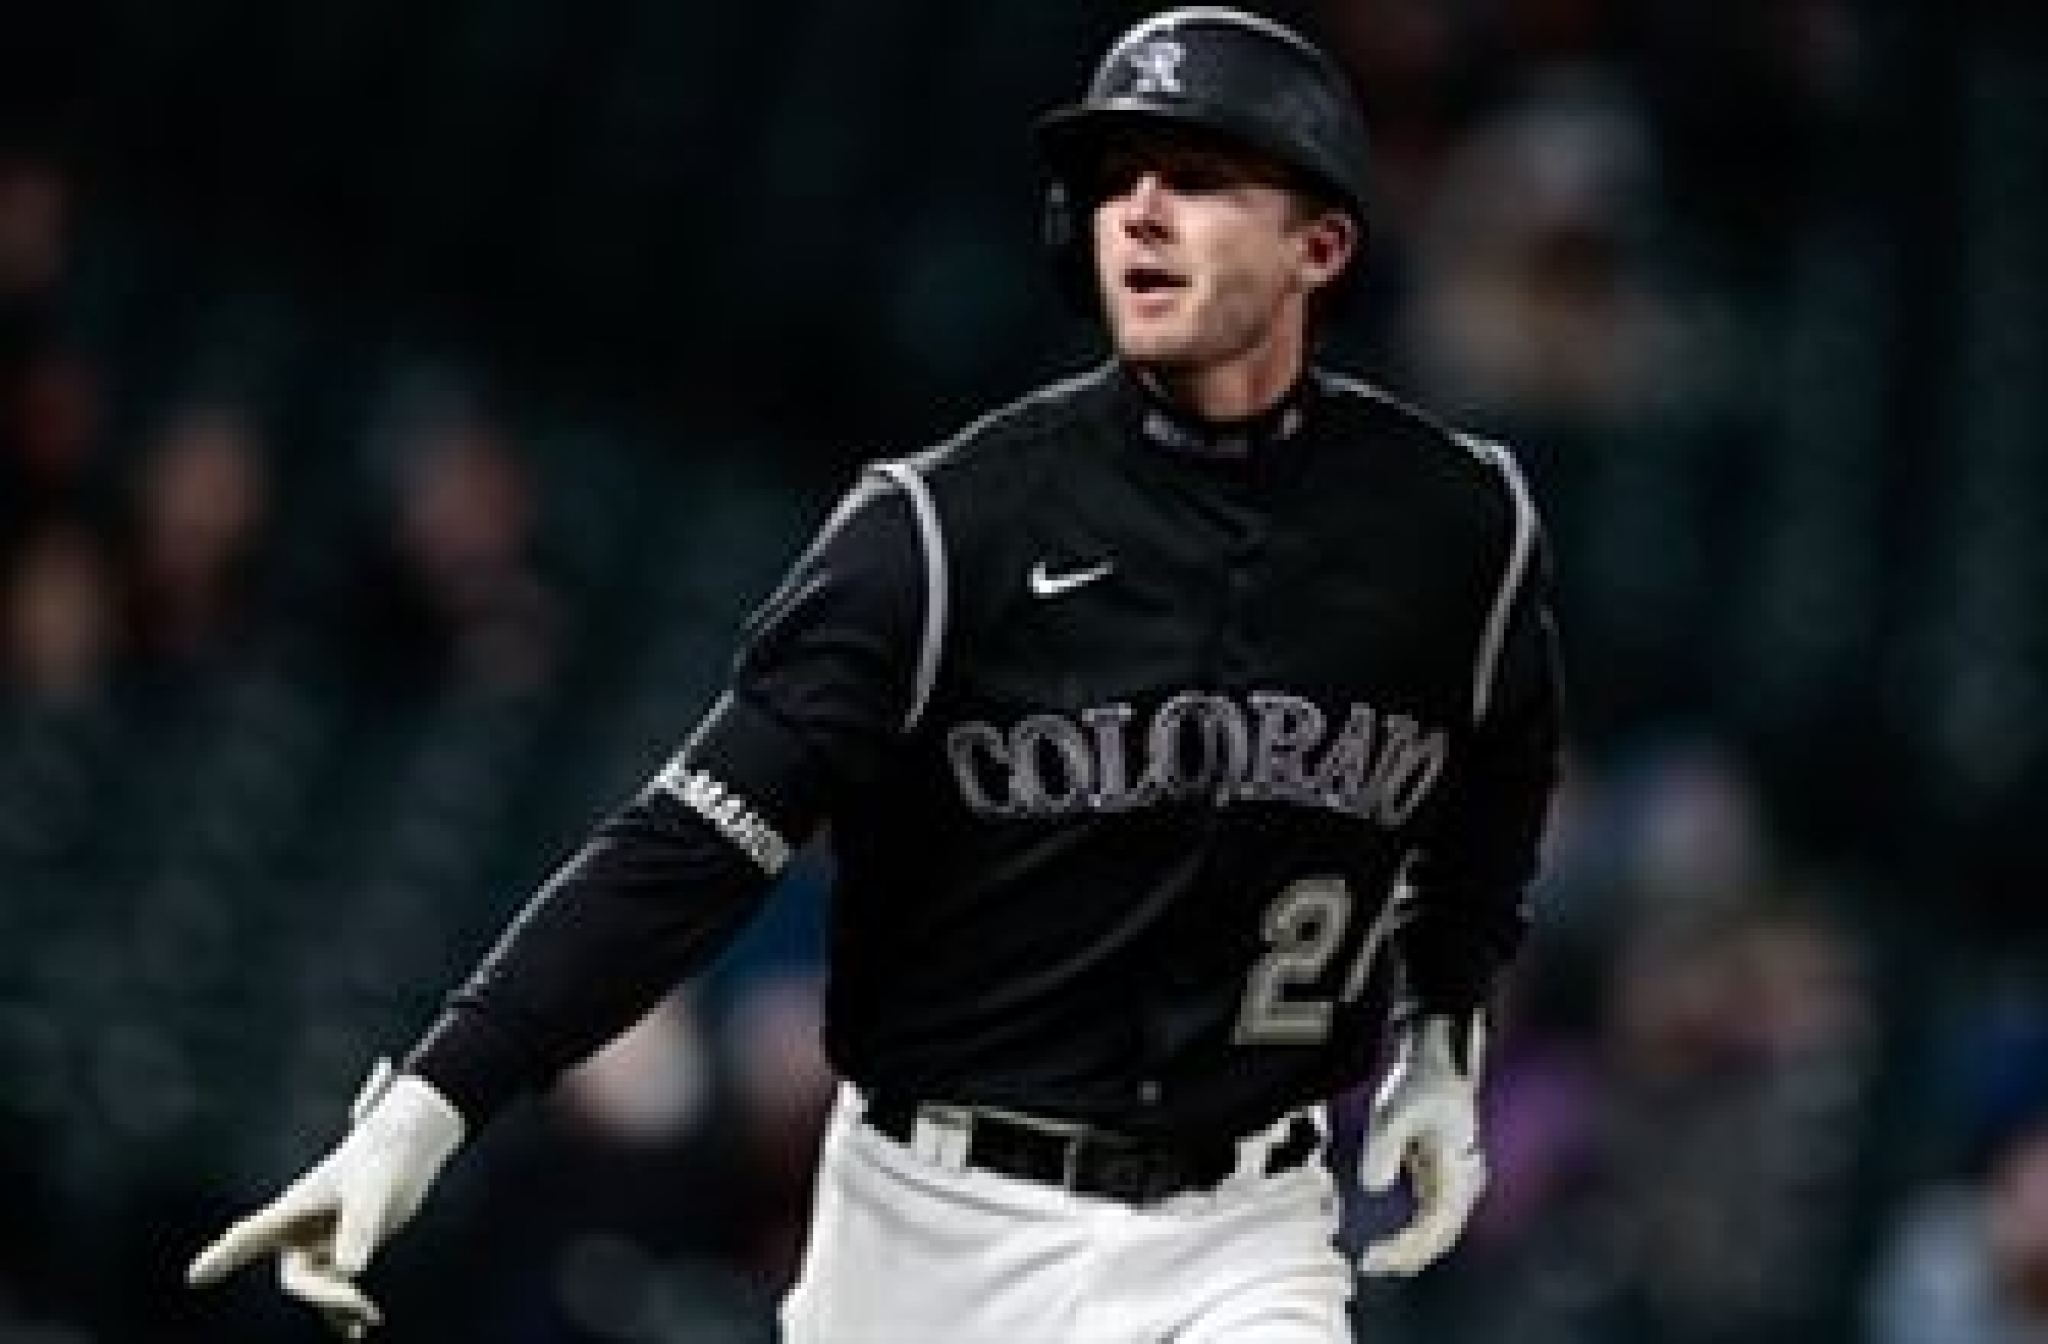 Ryan McMahon cranks three homers, but Rockies lose to D-Backs in wild extra-inning tilt